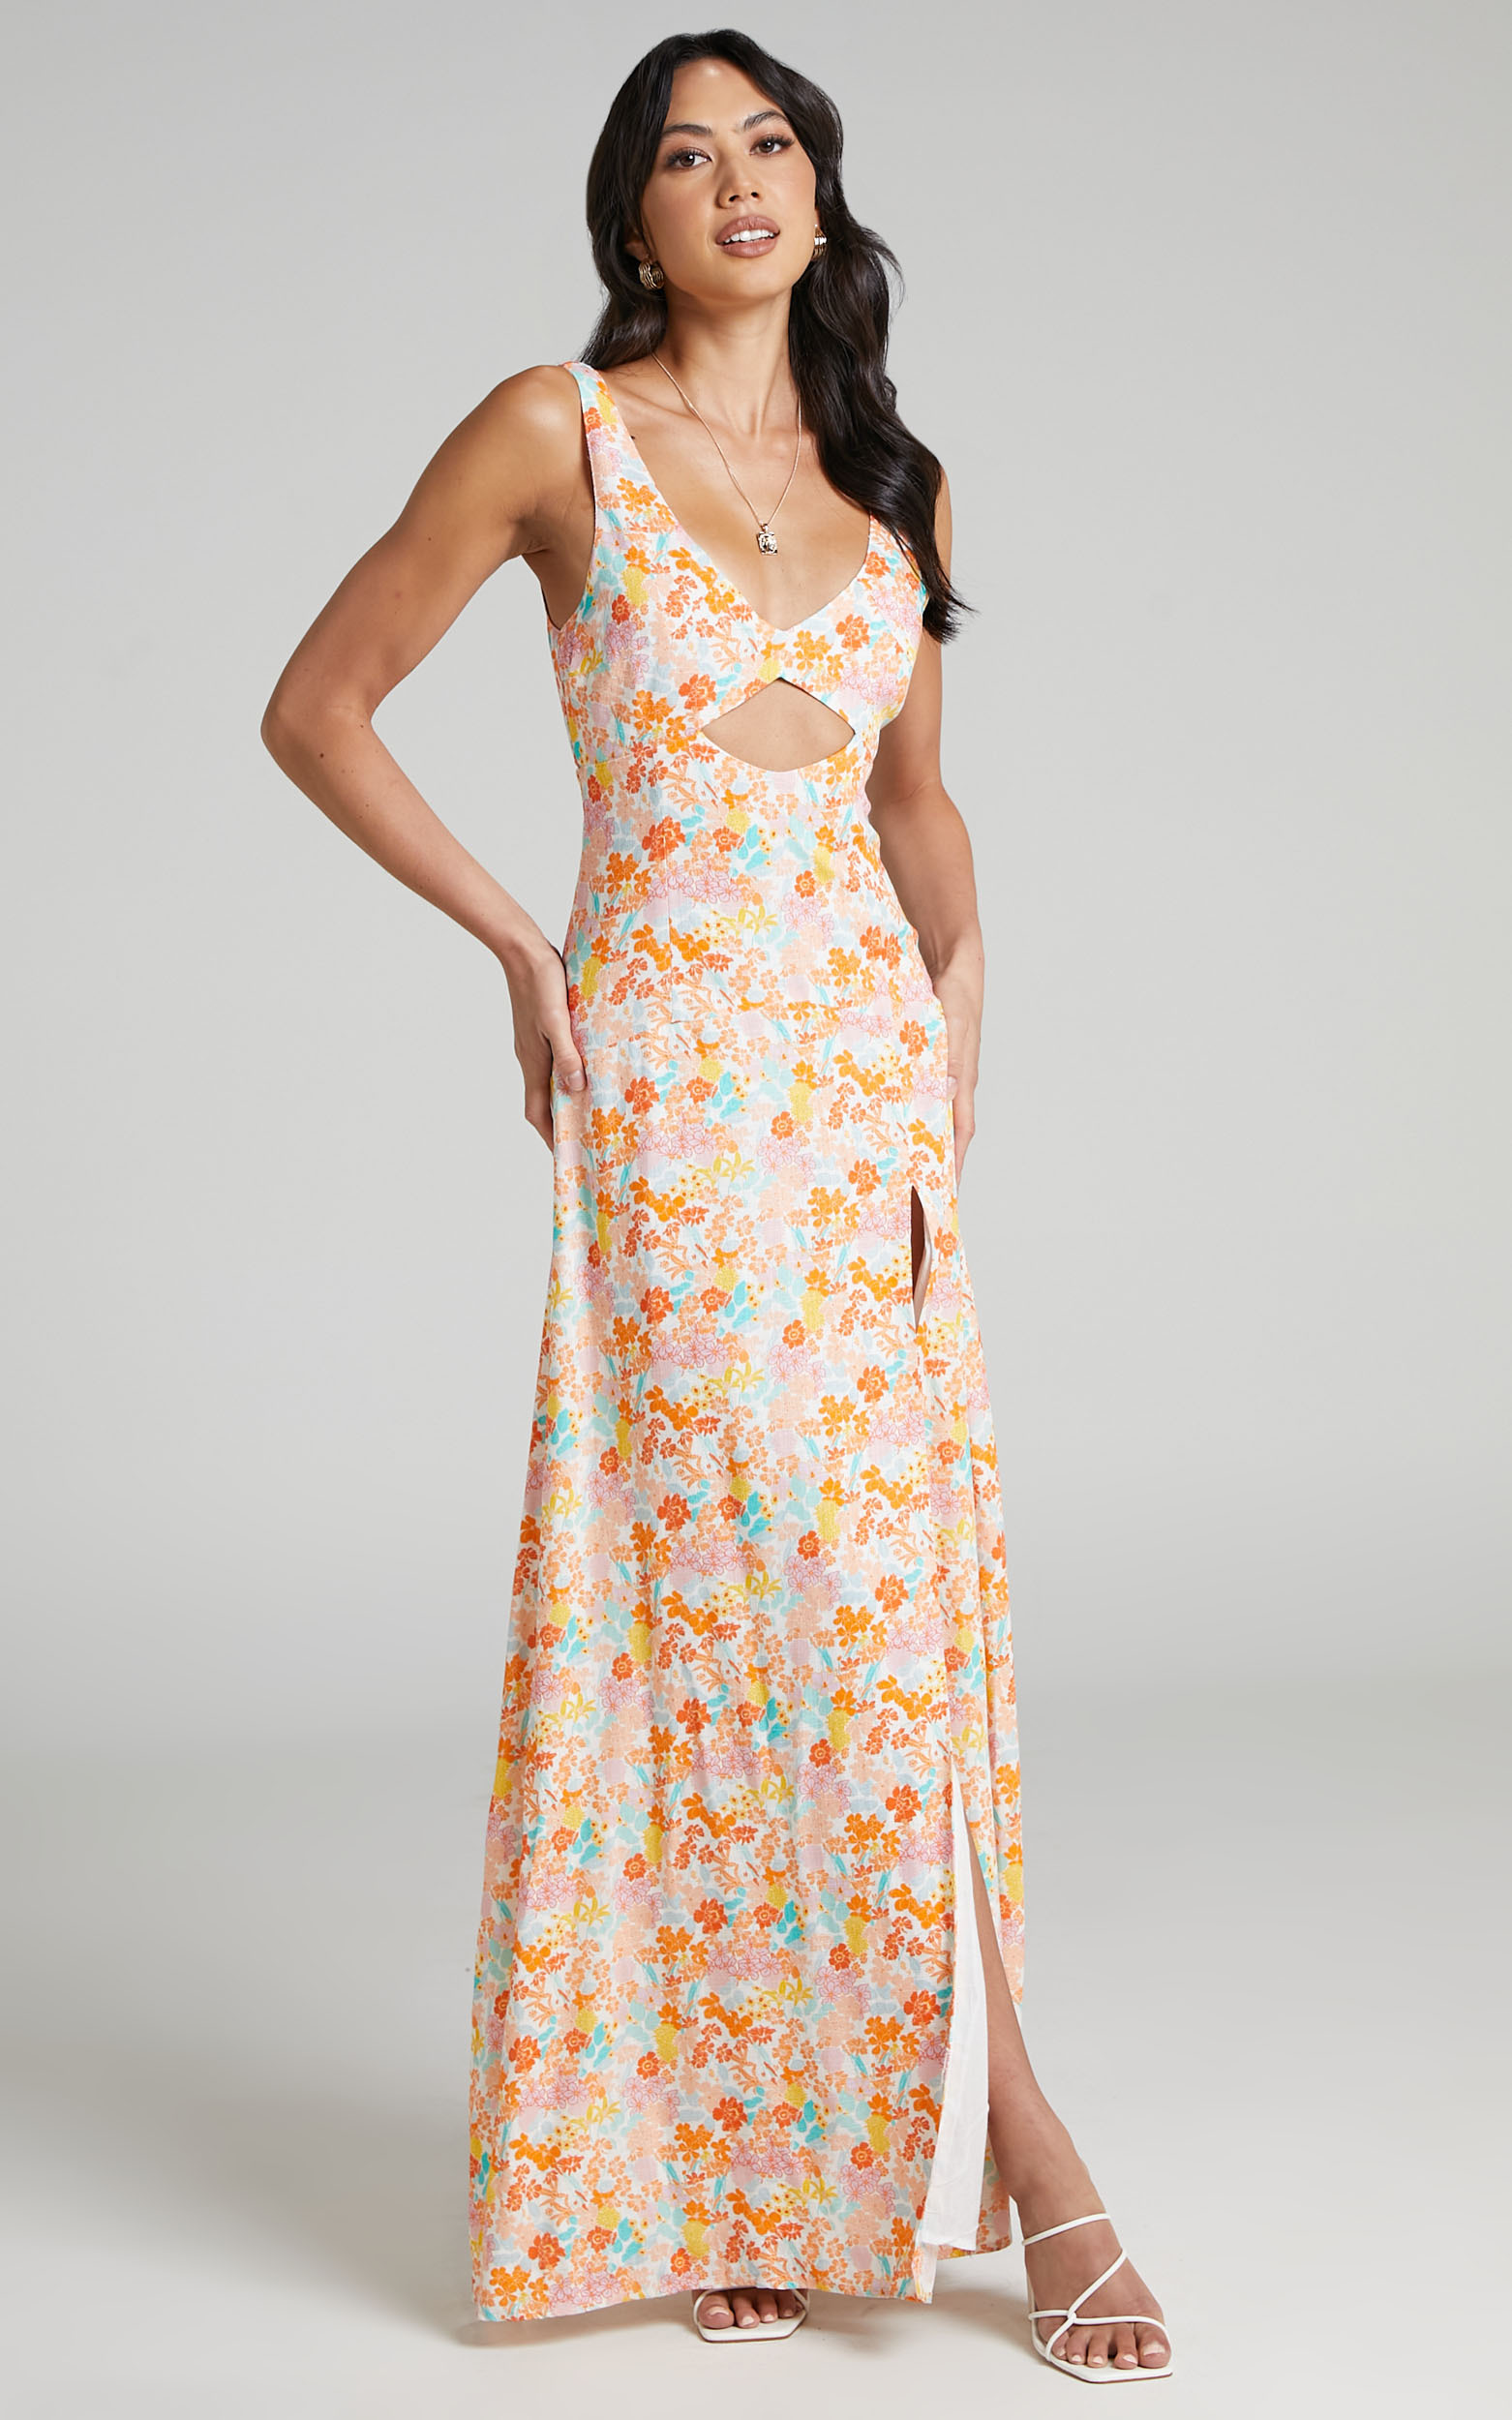 Edellen cut out Maxi Dress in Tequila Sunrise - 04, WHT2, hi-res image number null